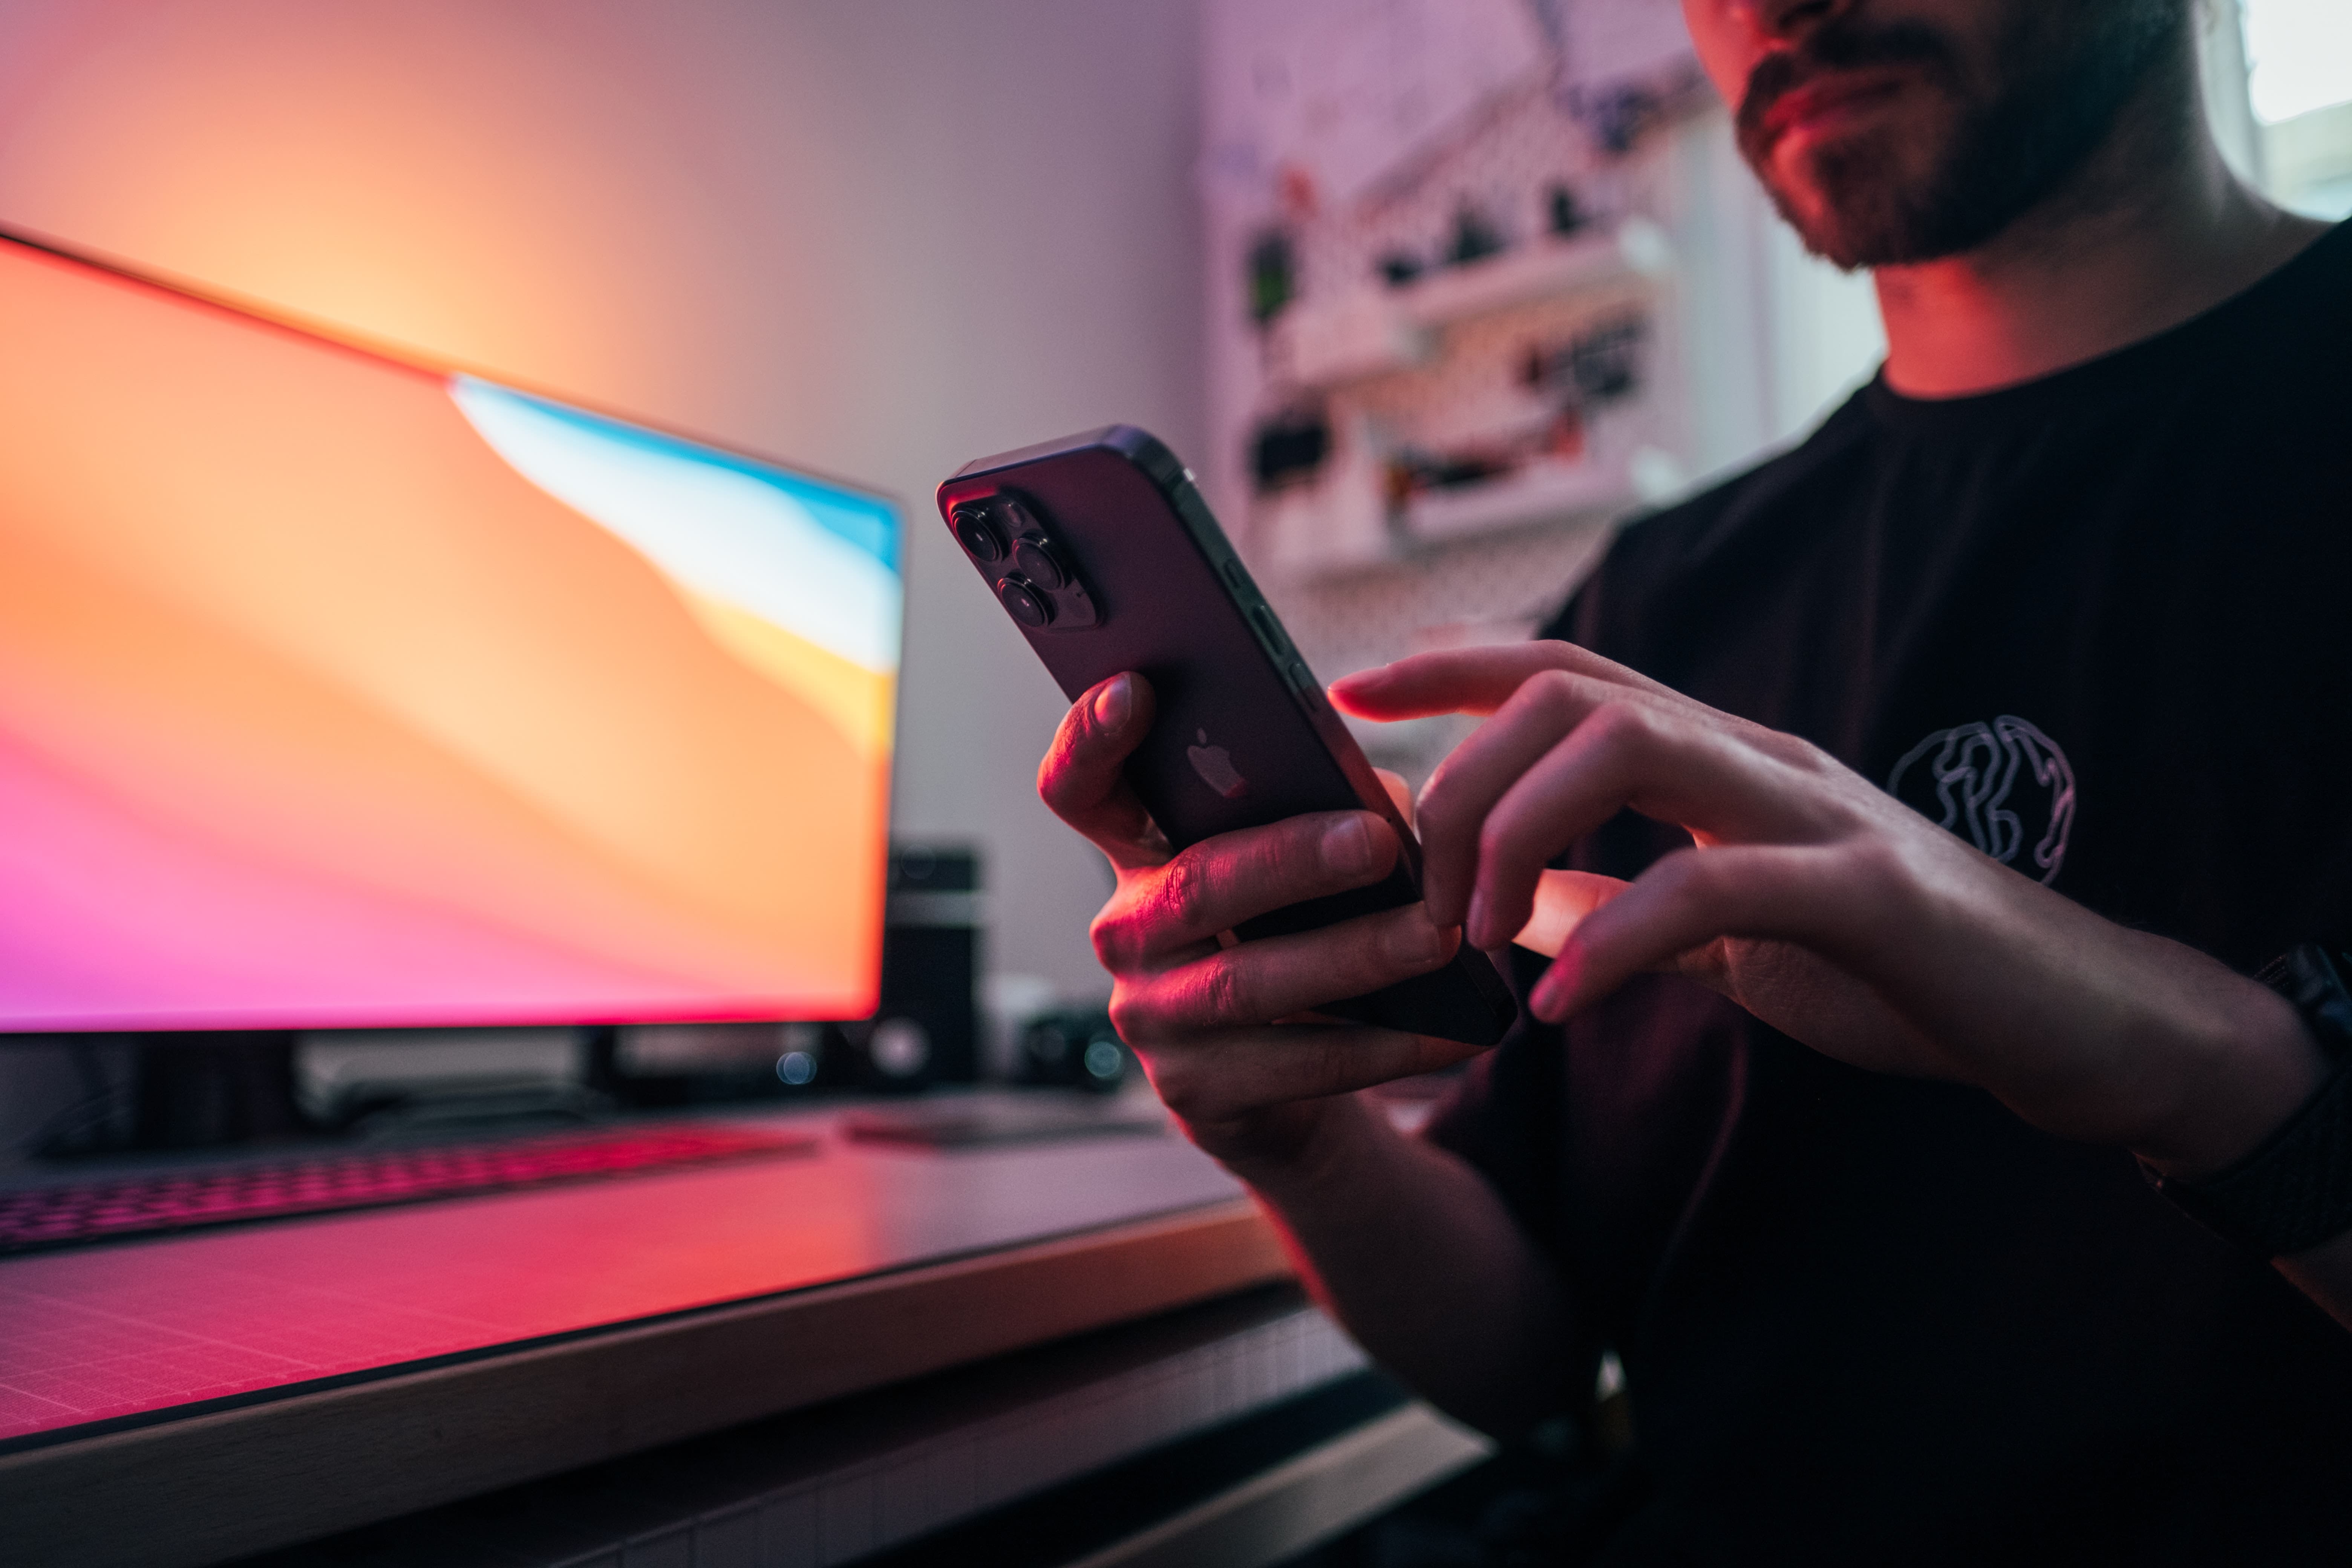 Man looking at iPhone with bright monitor in background